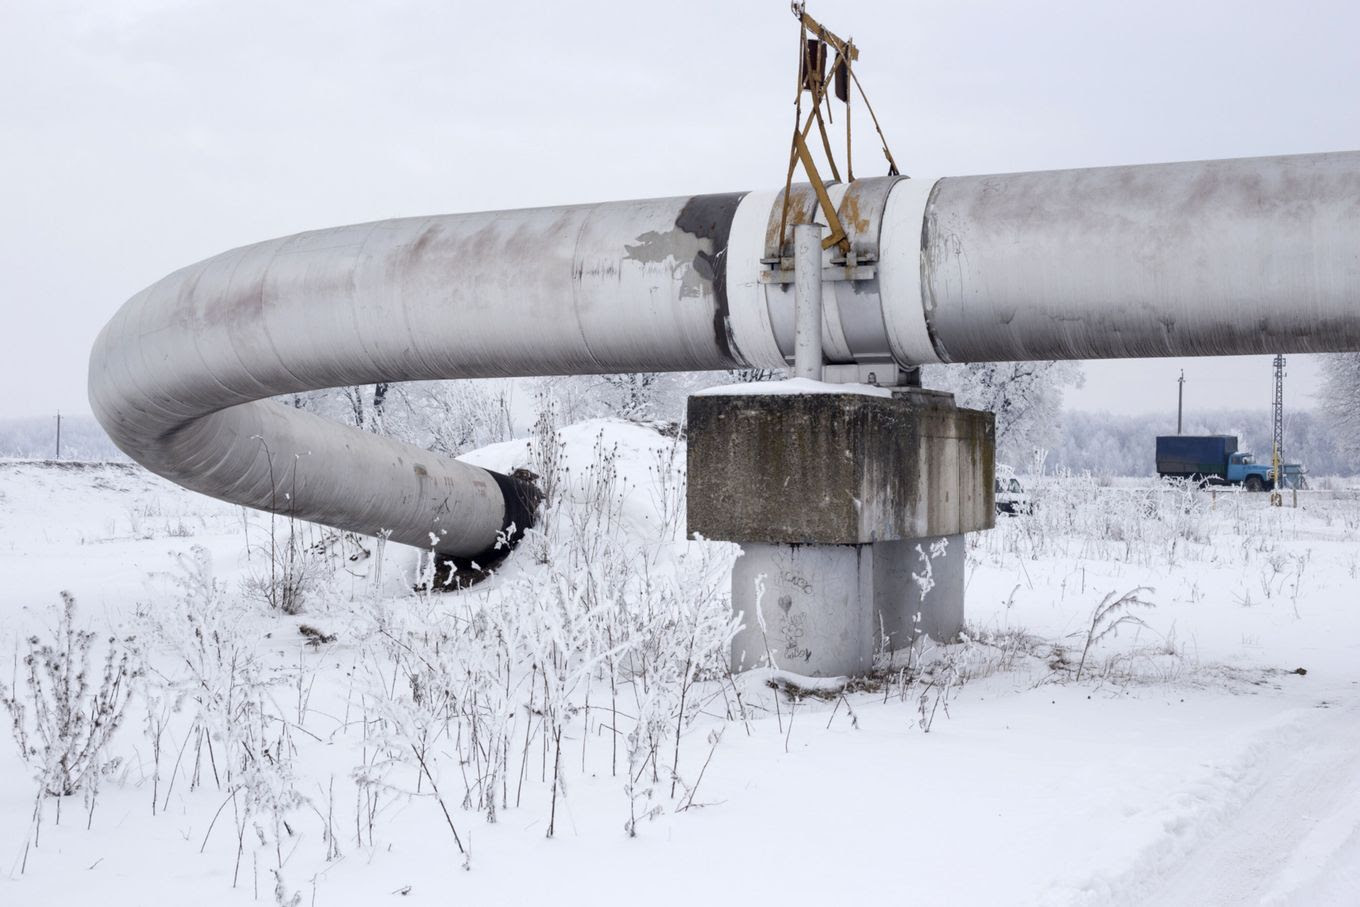 A section of the Urengoy-Pomary-Uzhgorod pipeline, Russia’s main natural gas export pipeline, near Ivano-Frankivsk, Ukraine, in 2014. (Vincent Mundy/Bloomberg News)